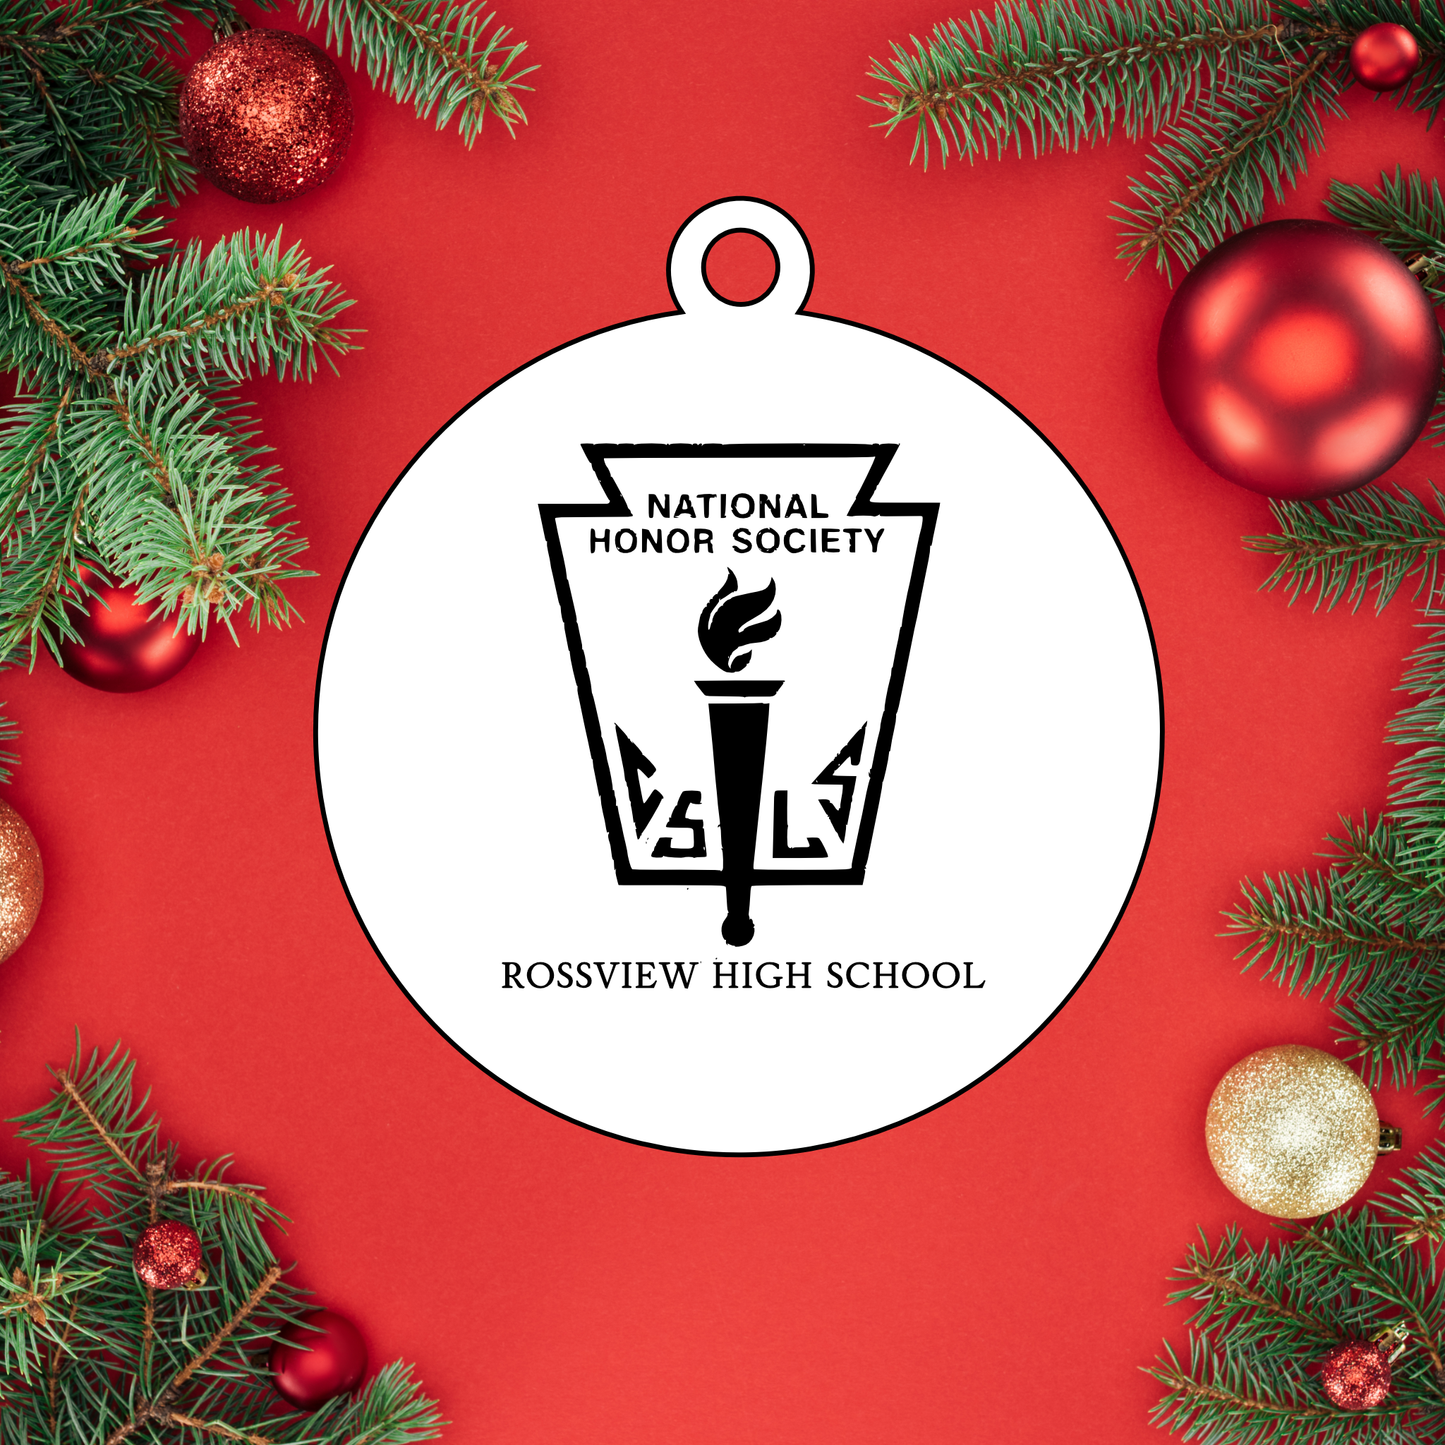 National Honor Society | Rossview High School Christmas Ornaments